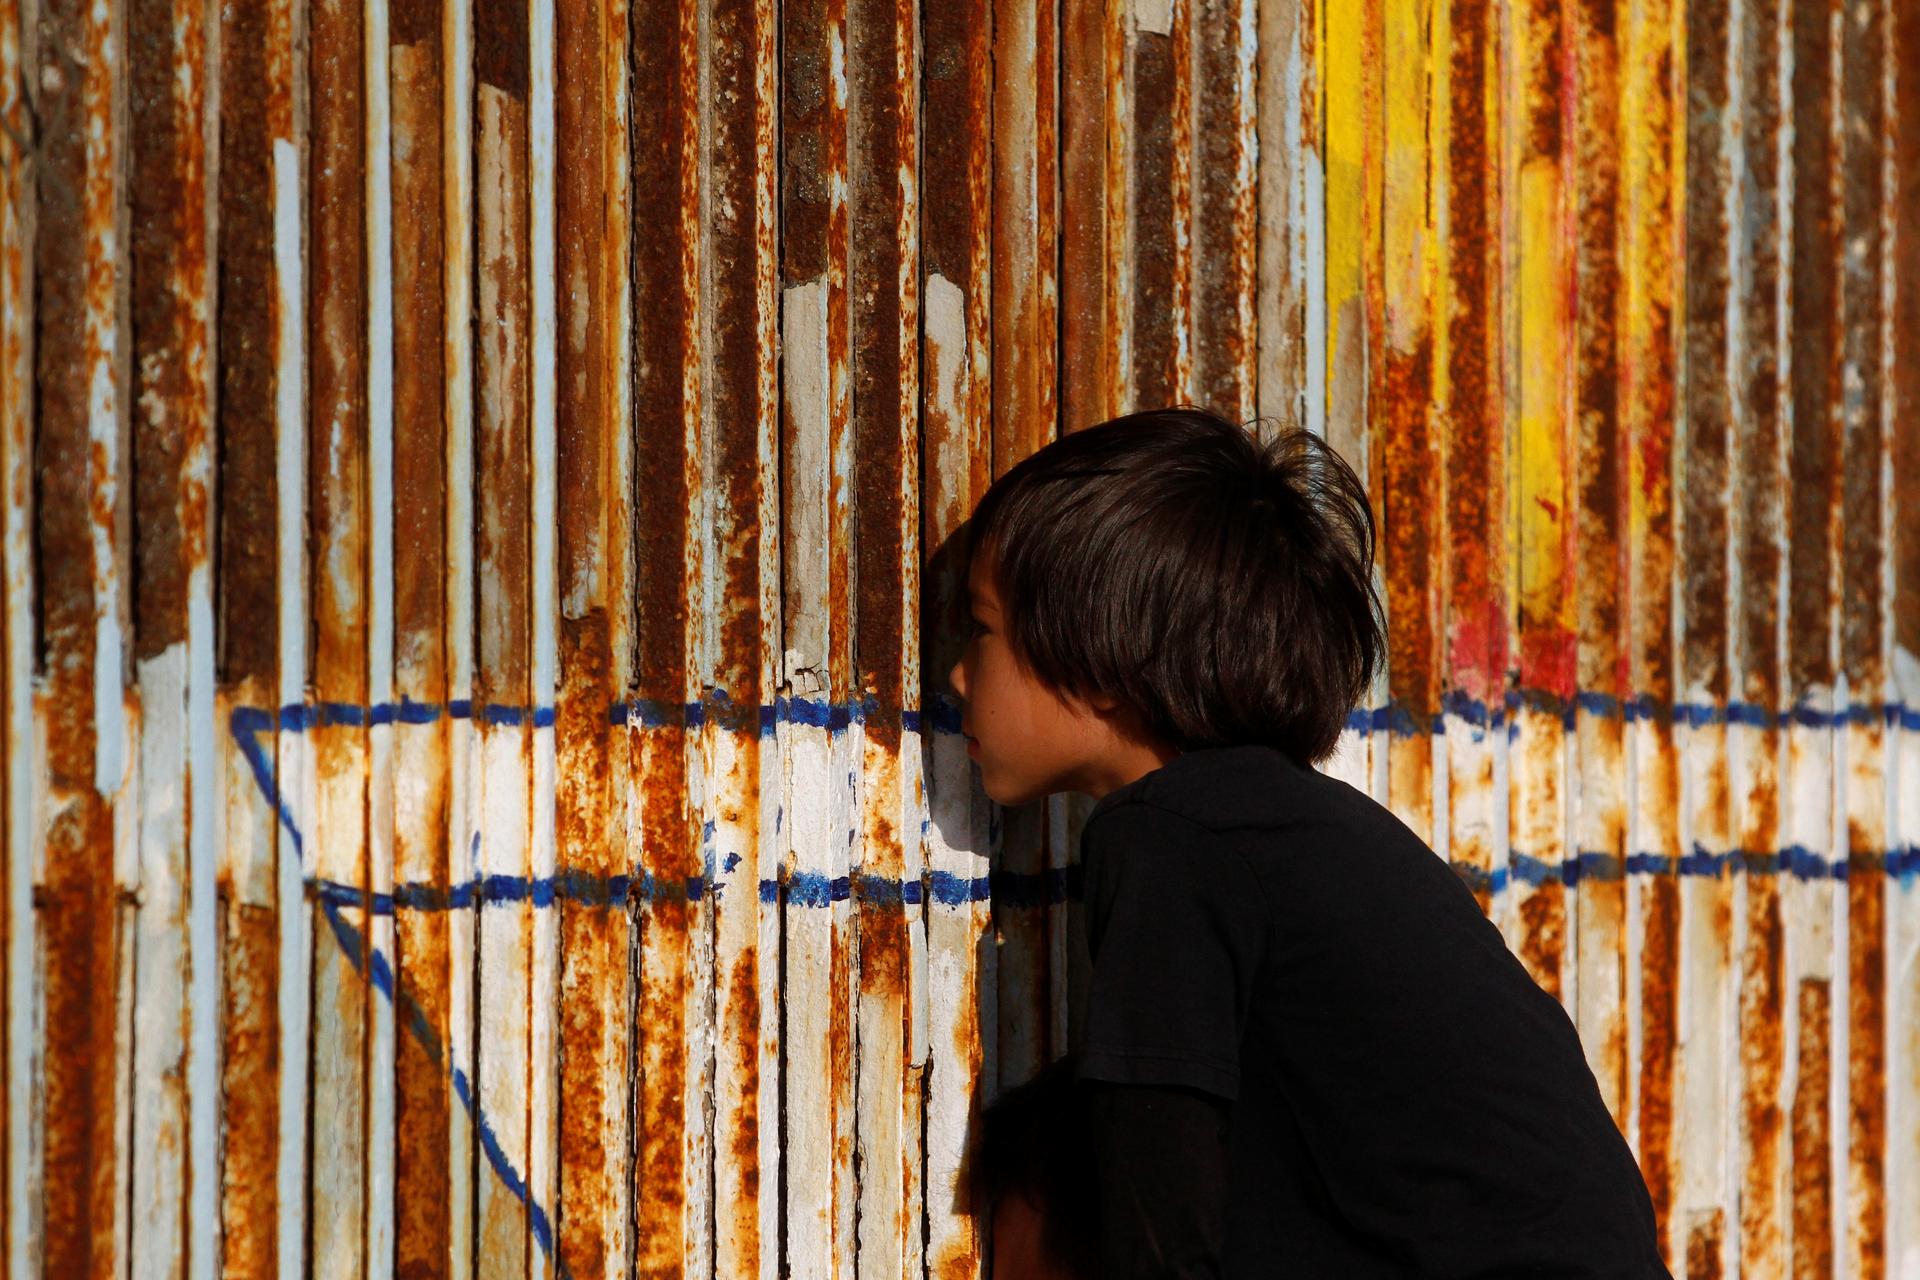 A child peers through the double steel fence that separates the US and Mexico, in Tijuana, last month